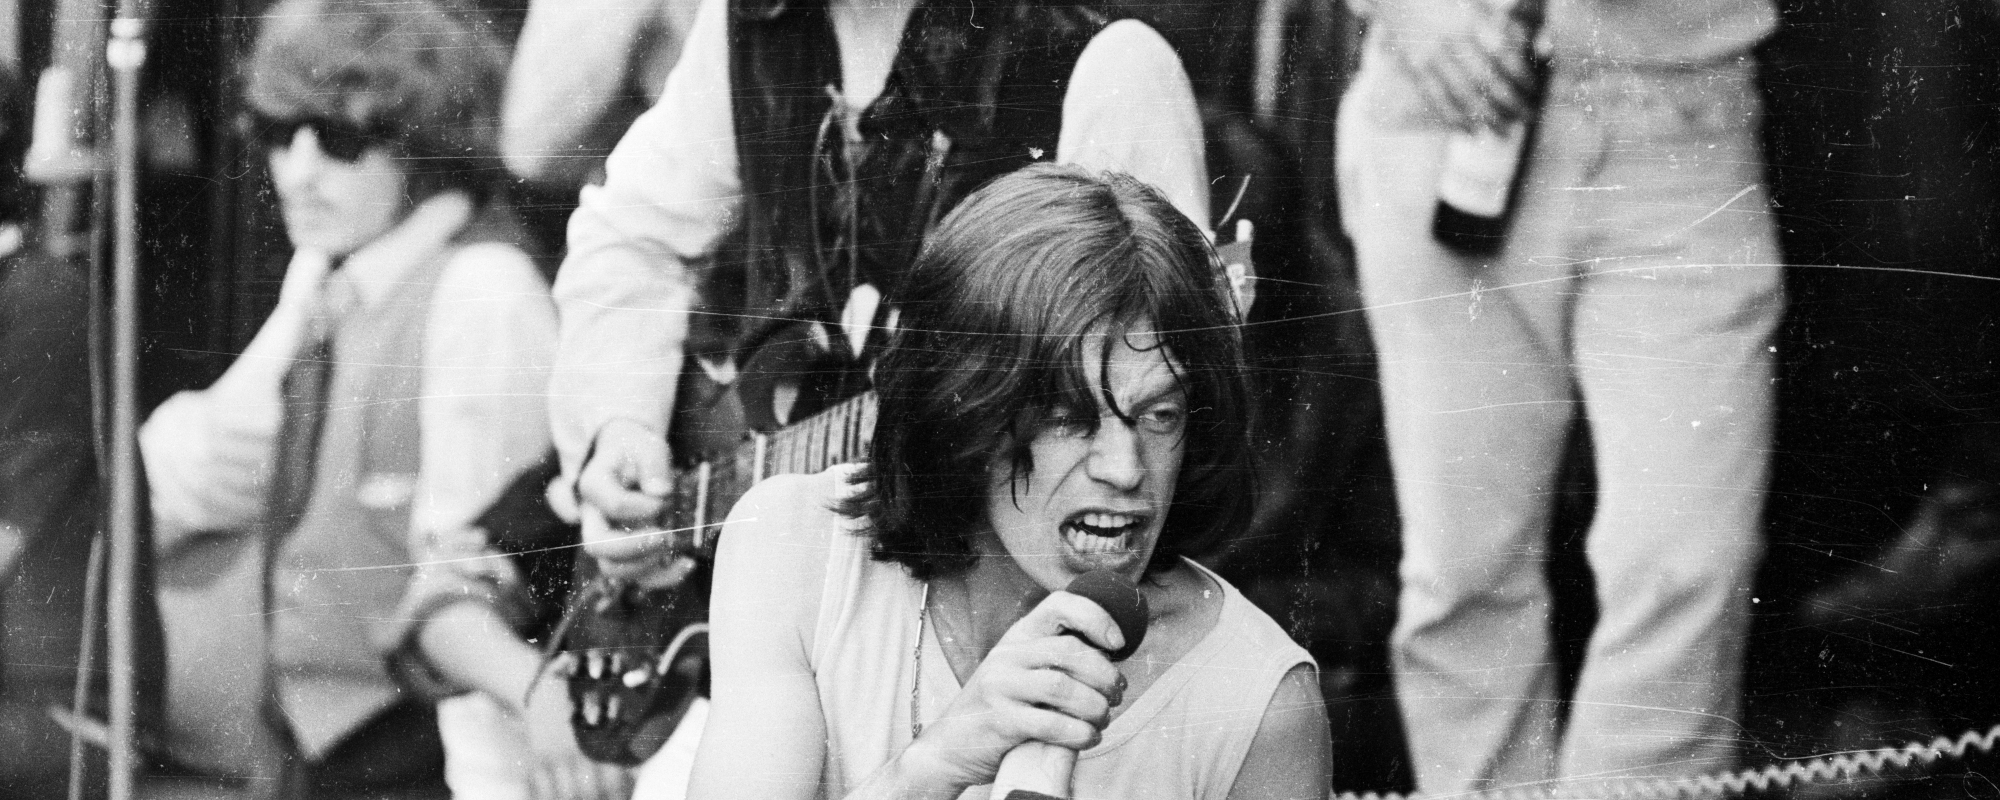 Remember When The Rolling Stones Played Altamont and a Concertgoer Was Killed